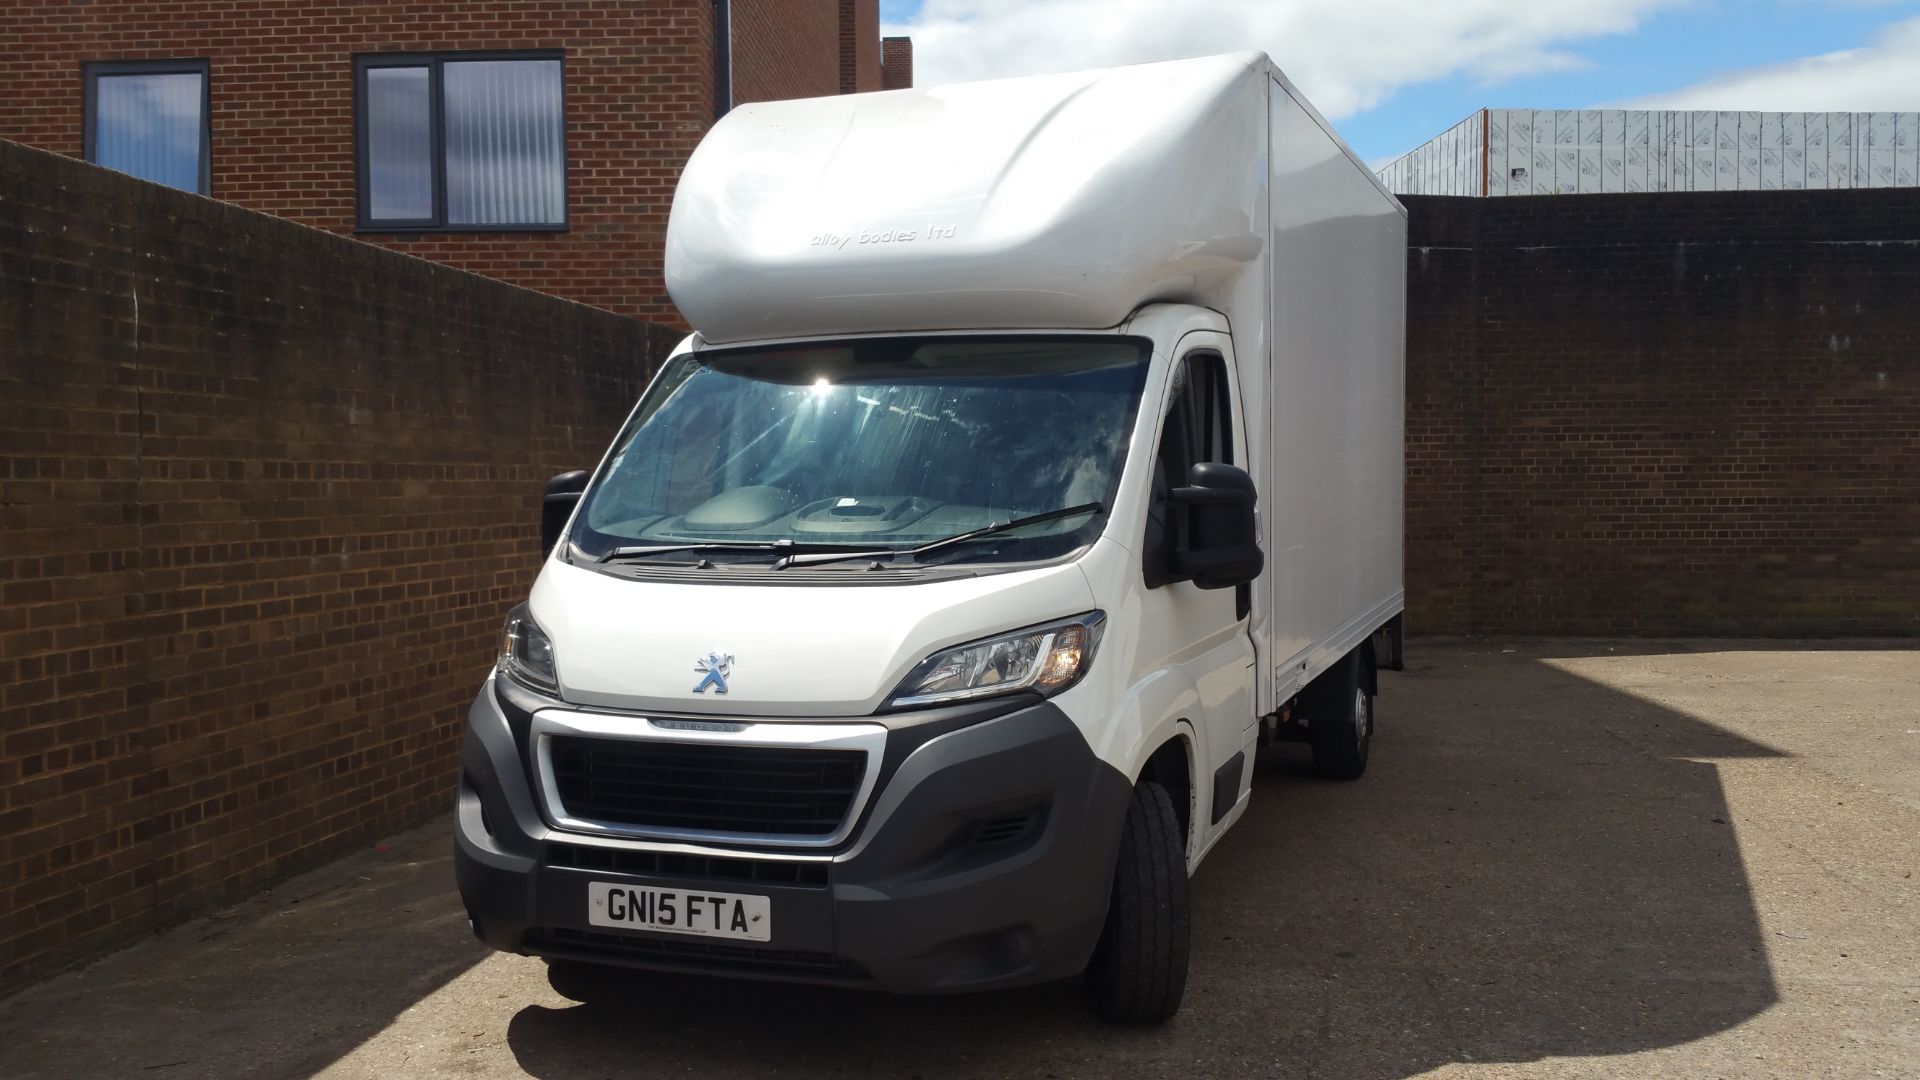 * 2015 Peugeot Boxer 335 HDI 3.5 tonne Luton Van with 500Kg Tail Lift and Aircon, Reg GN15 FTA, - Image 4 of 9